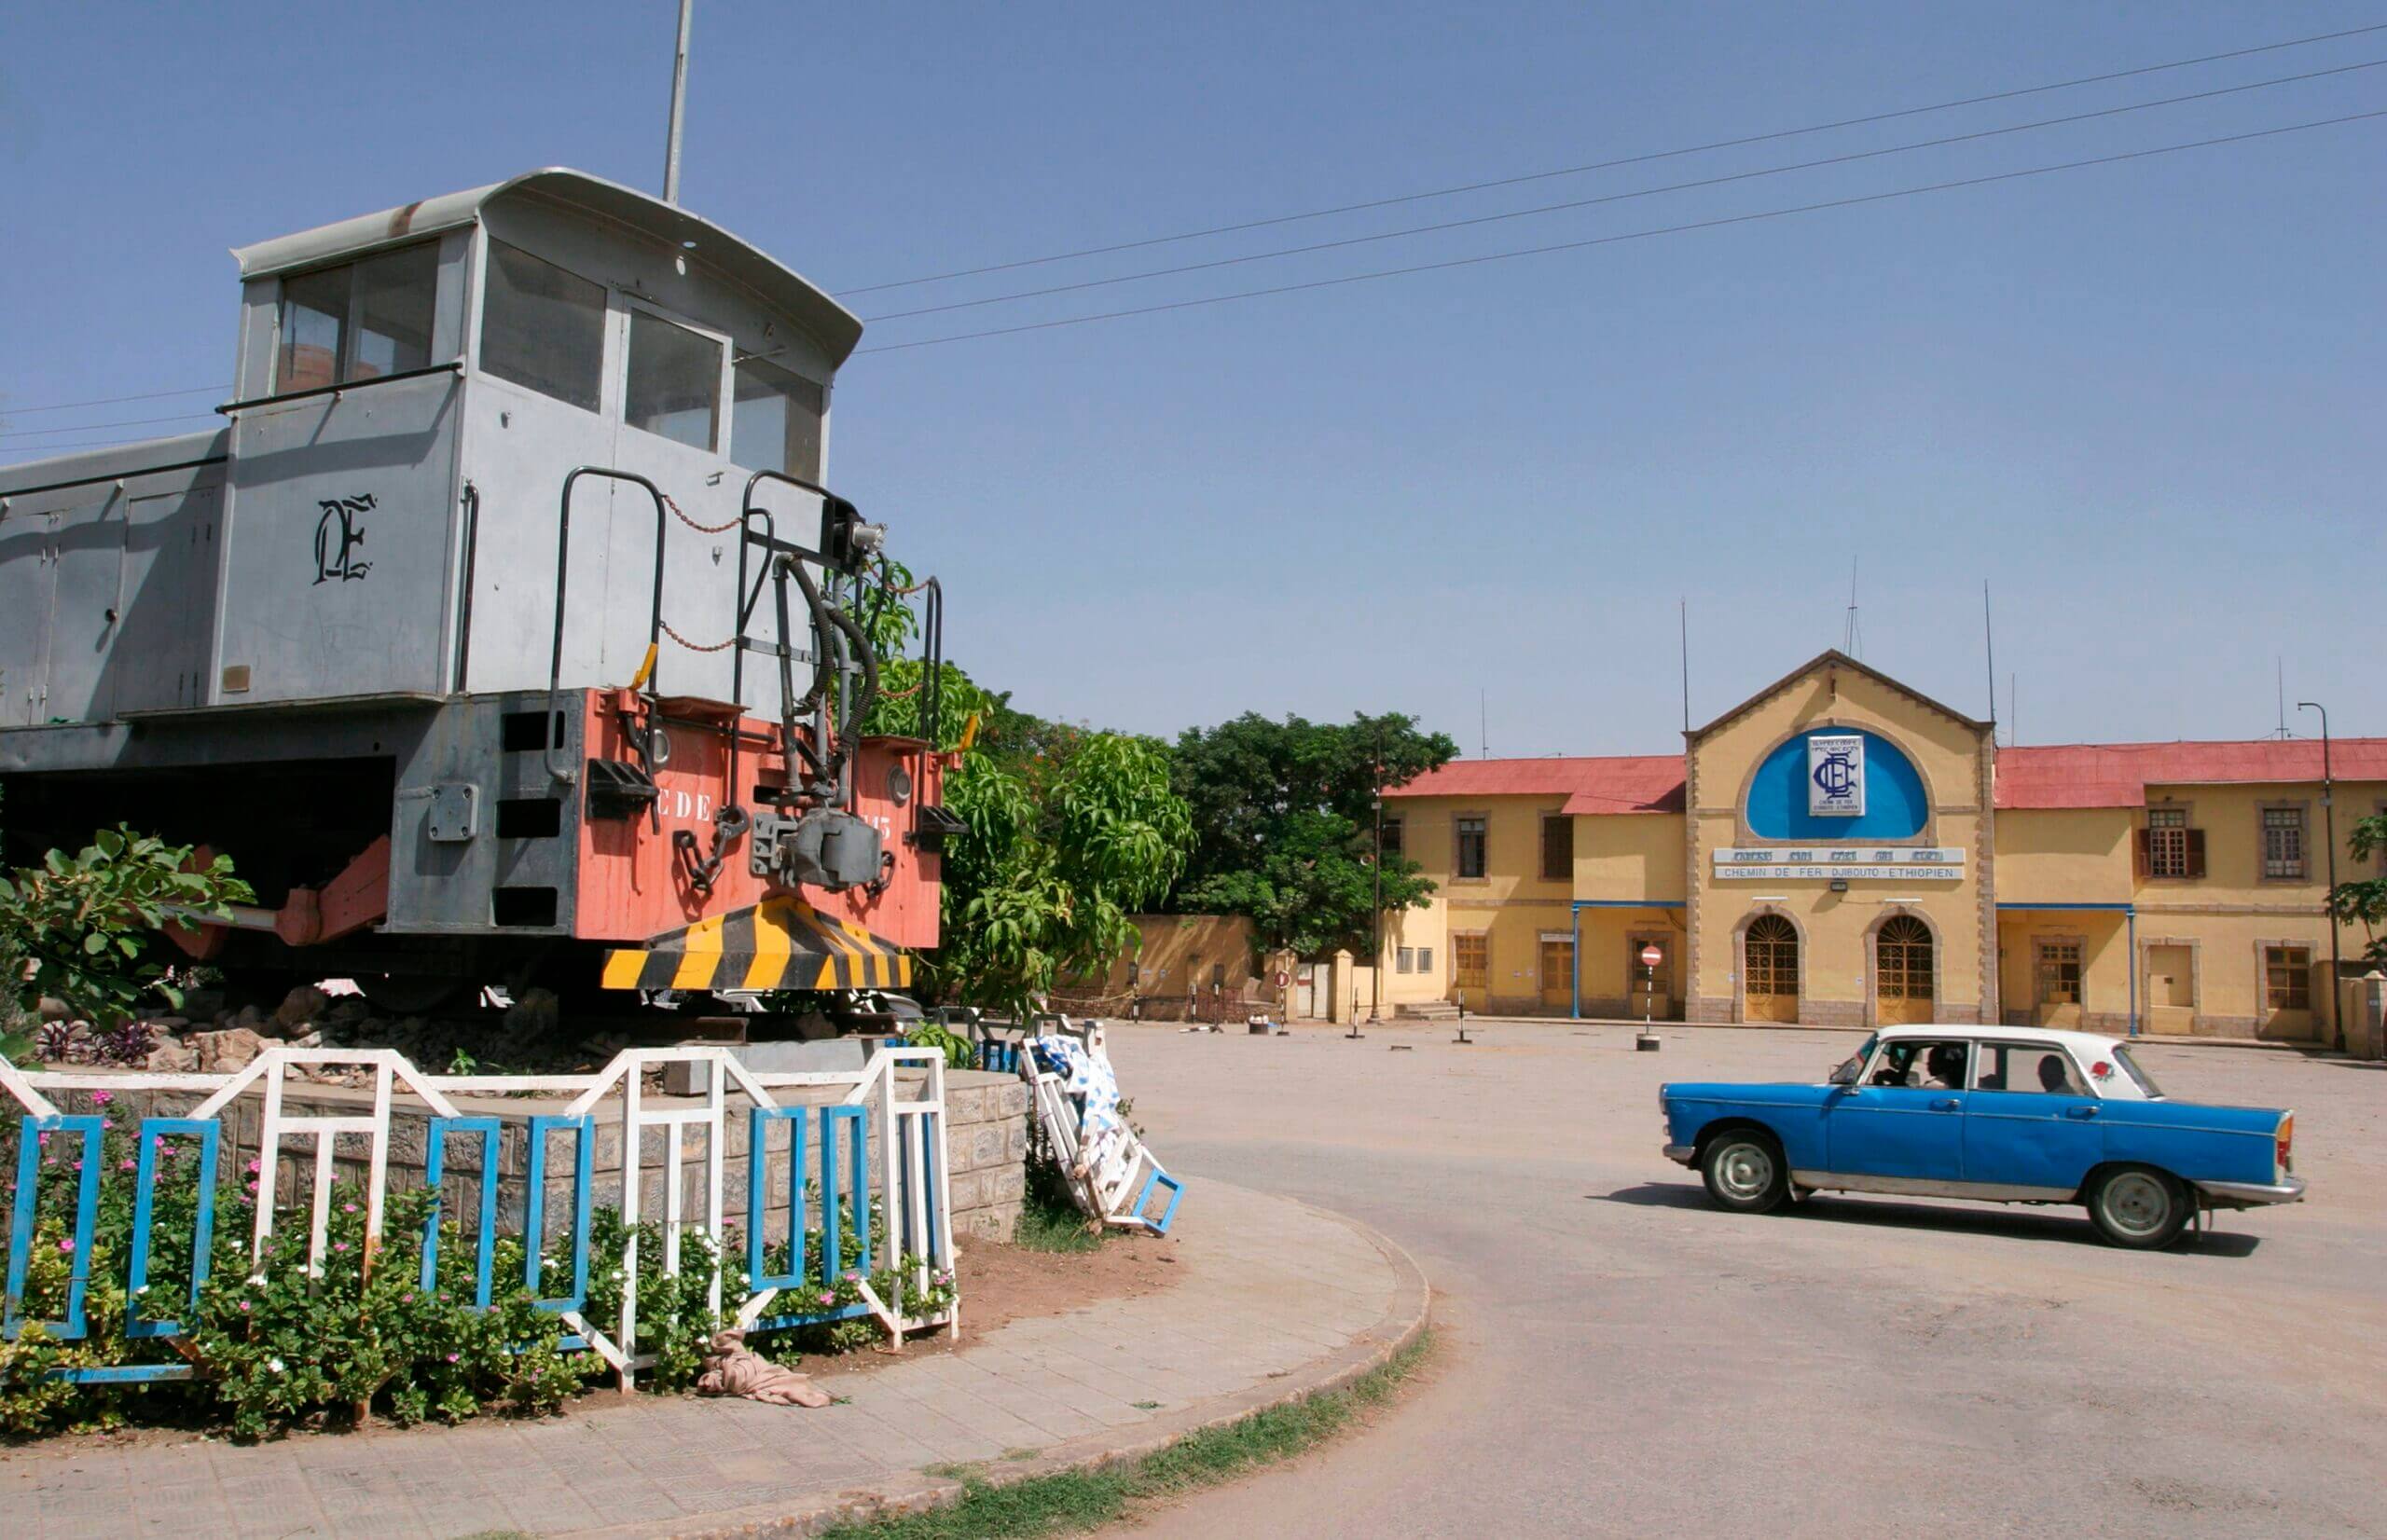 A parked blue car beside a train dire dawa, creating a vibrant contrast between the two modes of transportation.